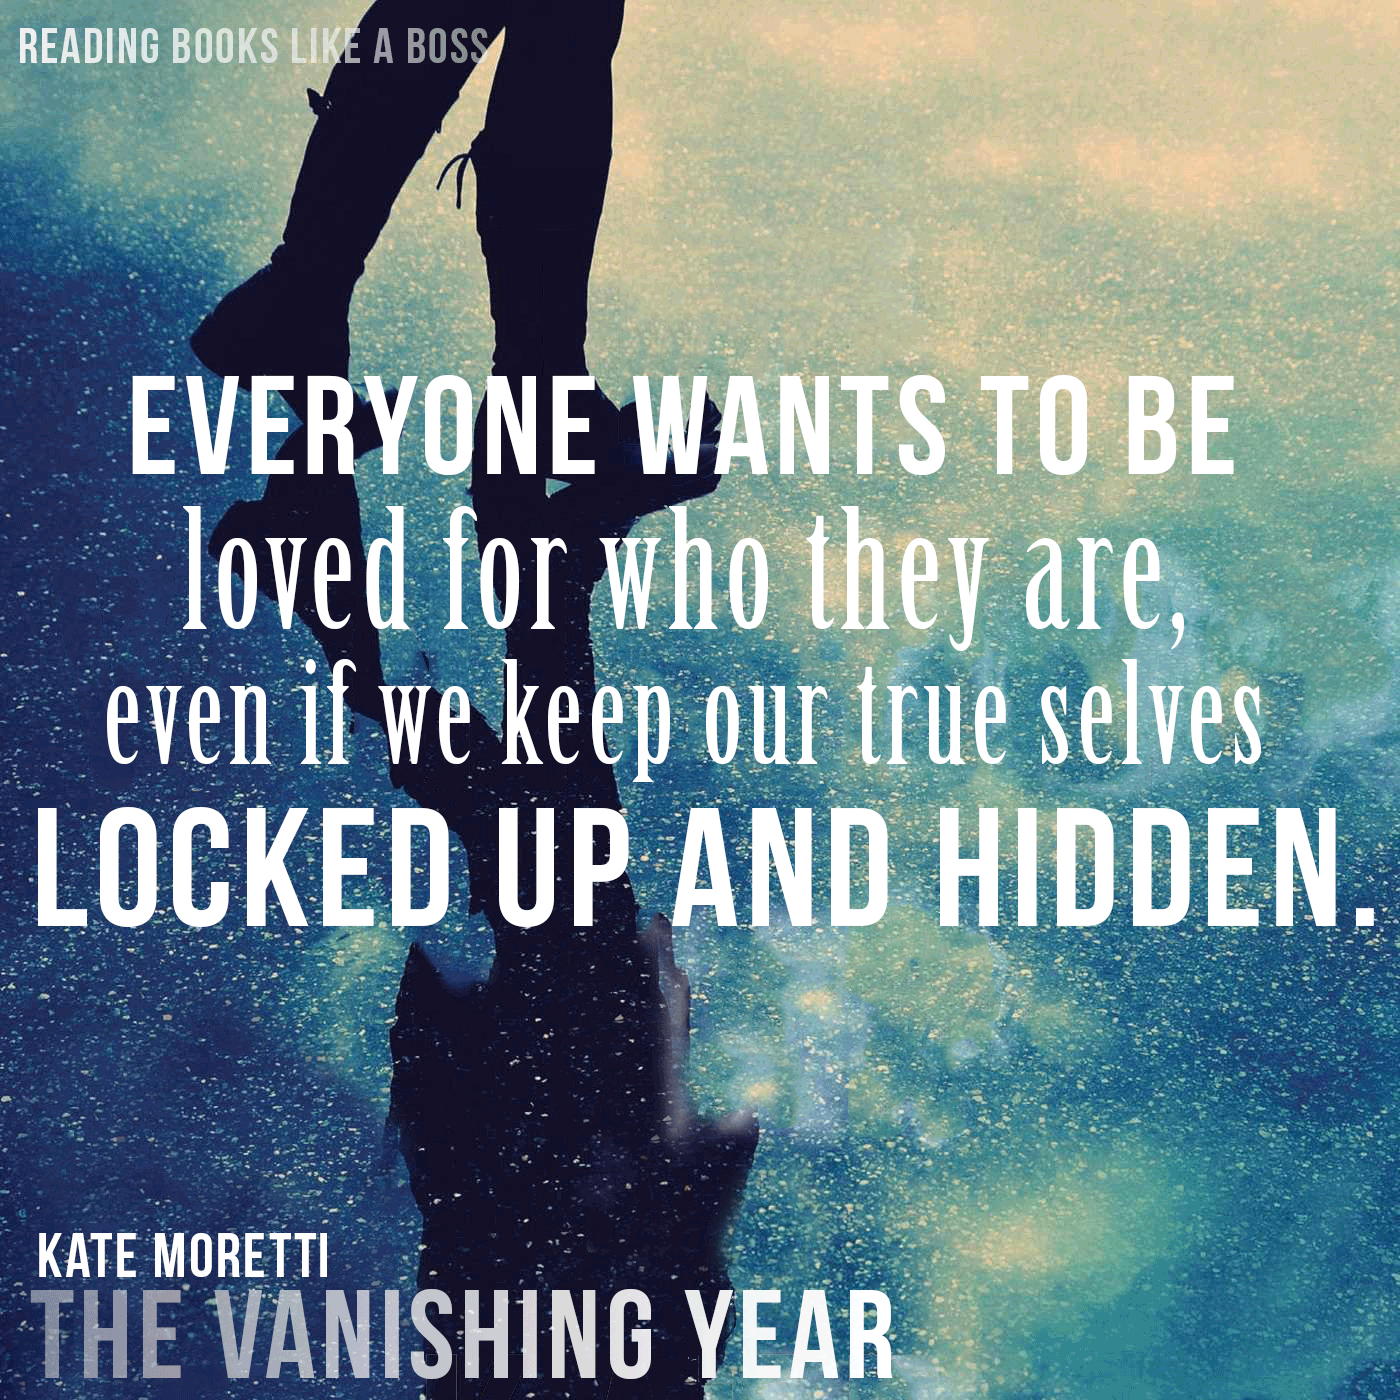 Teaser - The Vanishing Year by Kate Moretti